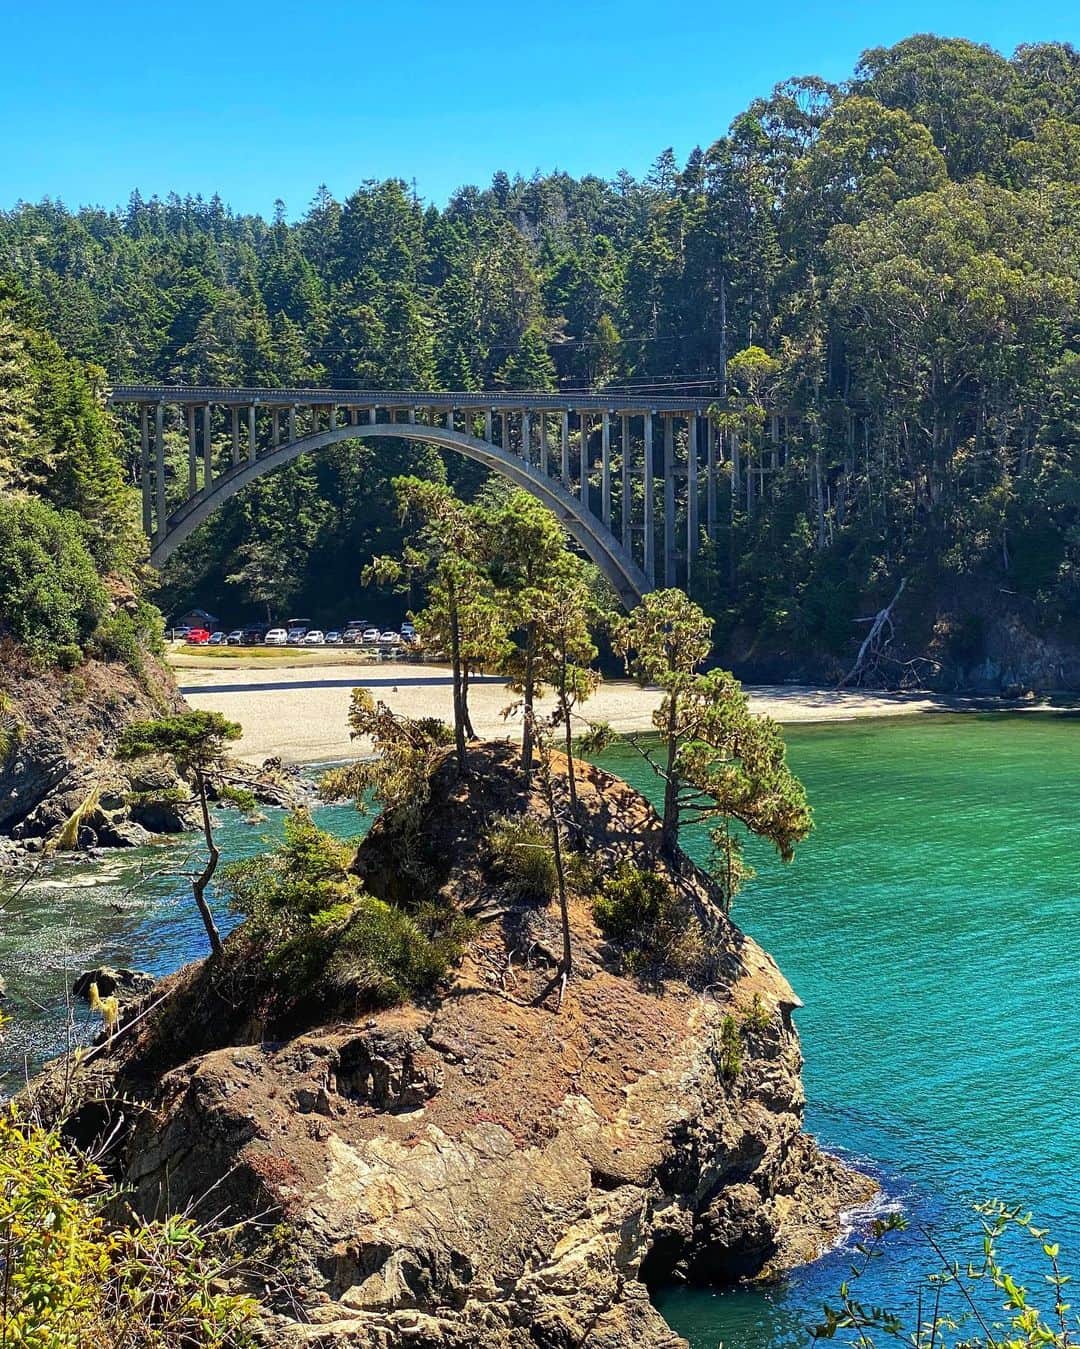 Antonietteのインスタグラム：「Ventured off to Mendocino County for a few days where we visited some beaches and Russian Gulch State Park where it was  peaceful, quiet and remote! It was so dreamy to be surrounded by the ocean and the lush surroundings of the redwood trees! Never been to this part of the California coastline and it was gorgeous! The waters were clear, turquoise blue, pristine but frigid! A nice break before the kids start distance learning  tomorrow. 😅 After this week (or every week)  I might have to recreate my own version of a Mendocino County beach by plunging into a tub full of ice water. 🏊🏼‍♀️ 🧊 💦 🛁😆 Here’s to a great school year..we will get through this! 💪🏽」